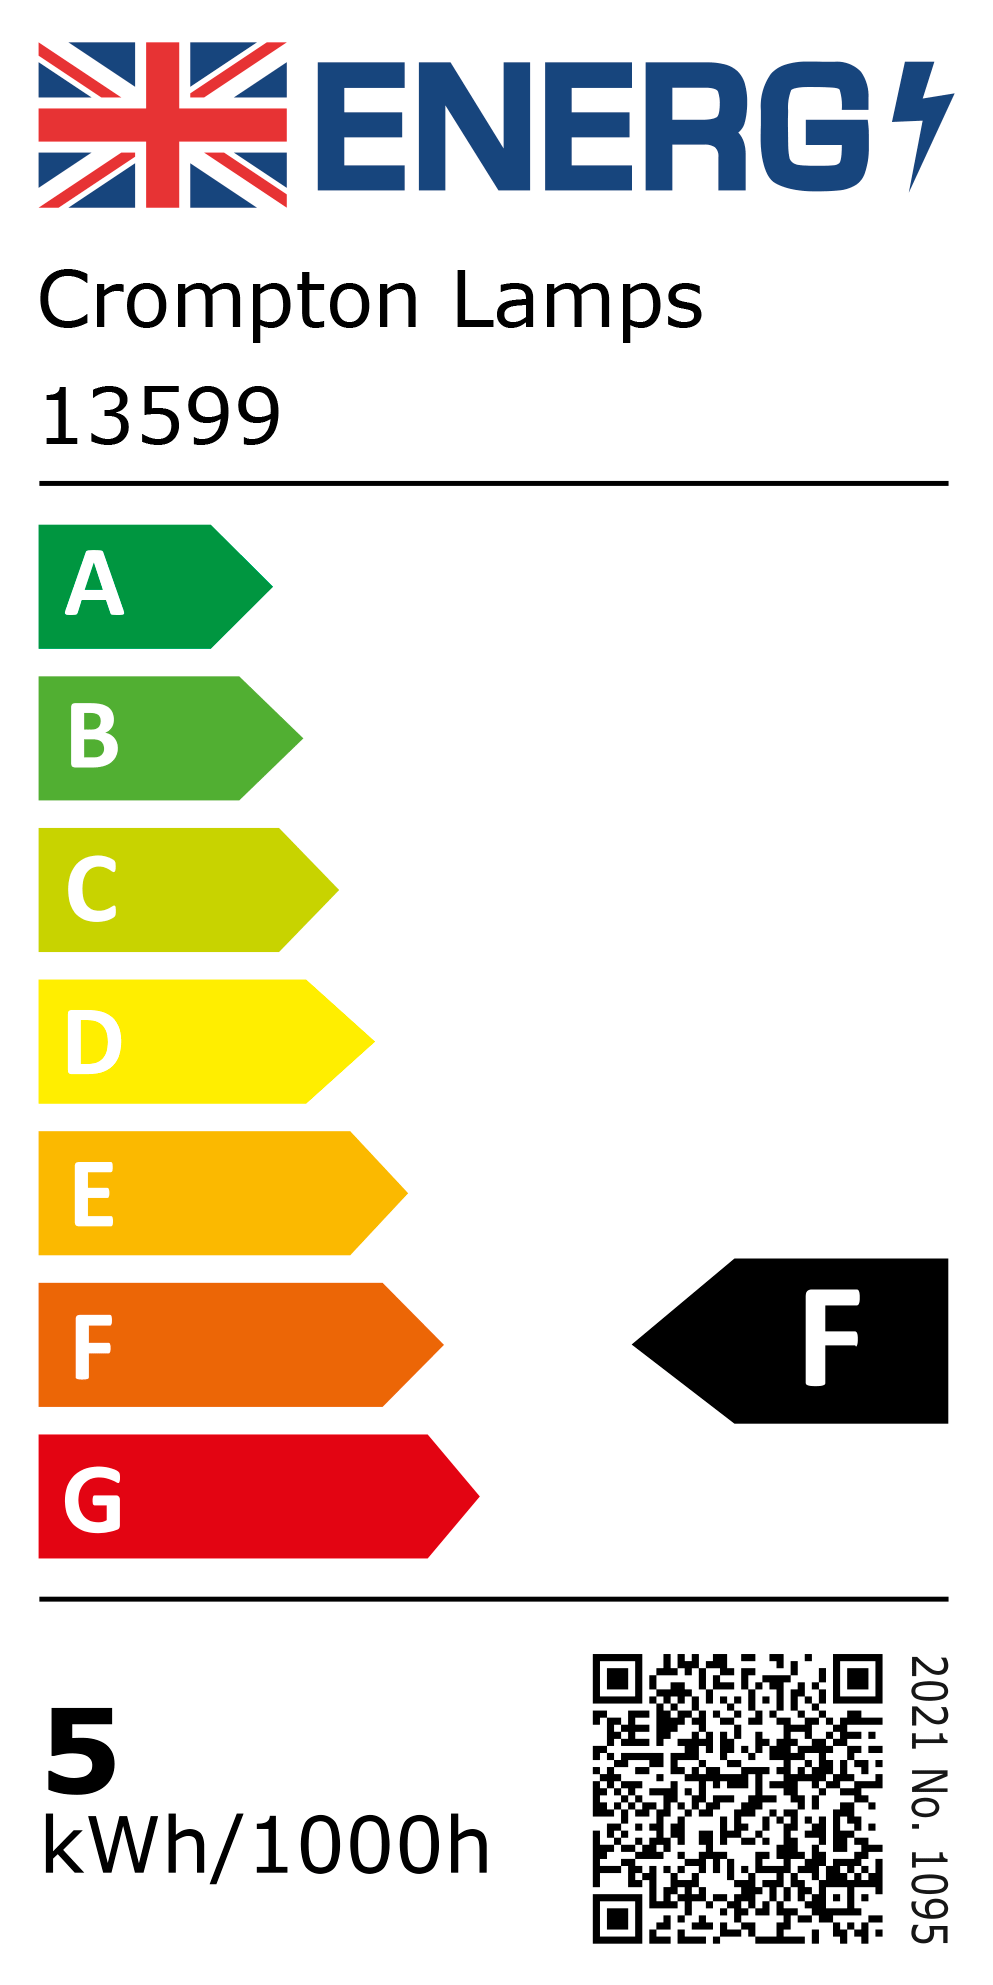 New 2021 Energy Rating Label: Stock Code 13599